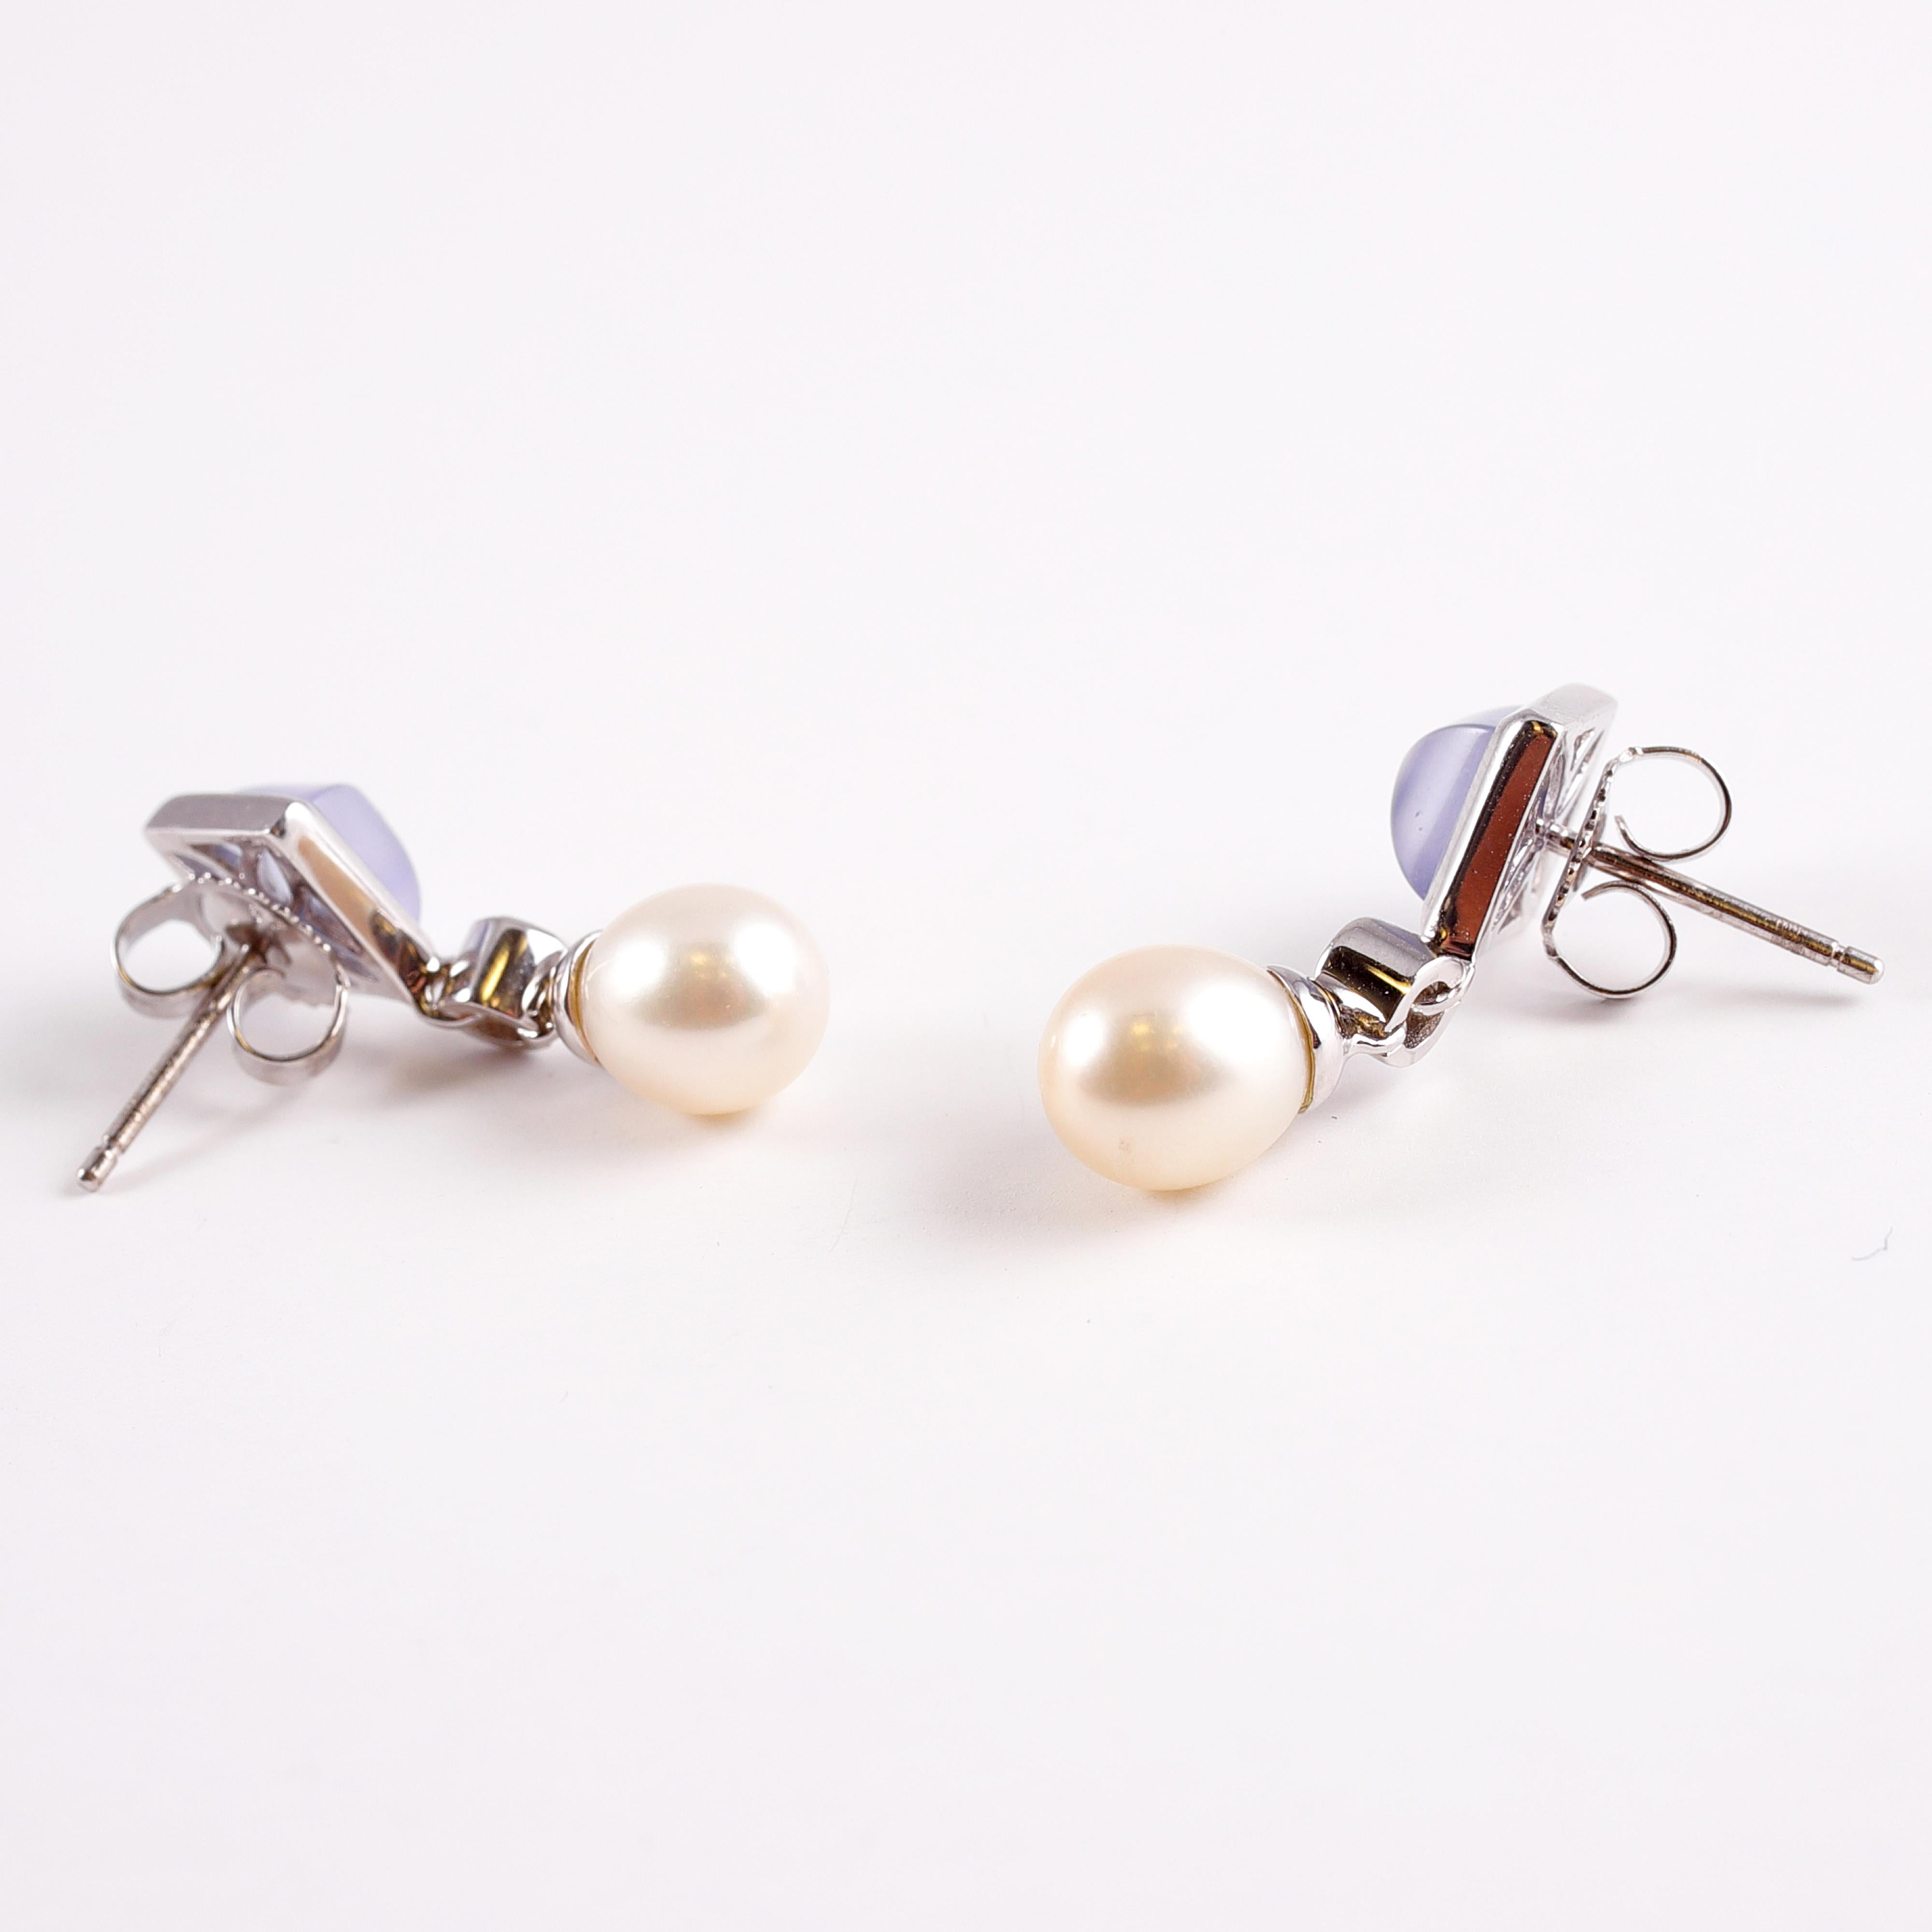 Tiffany & Co. Chalcedony Pearl Drop Earrings In Good Condition For Sale In Dallas, TX